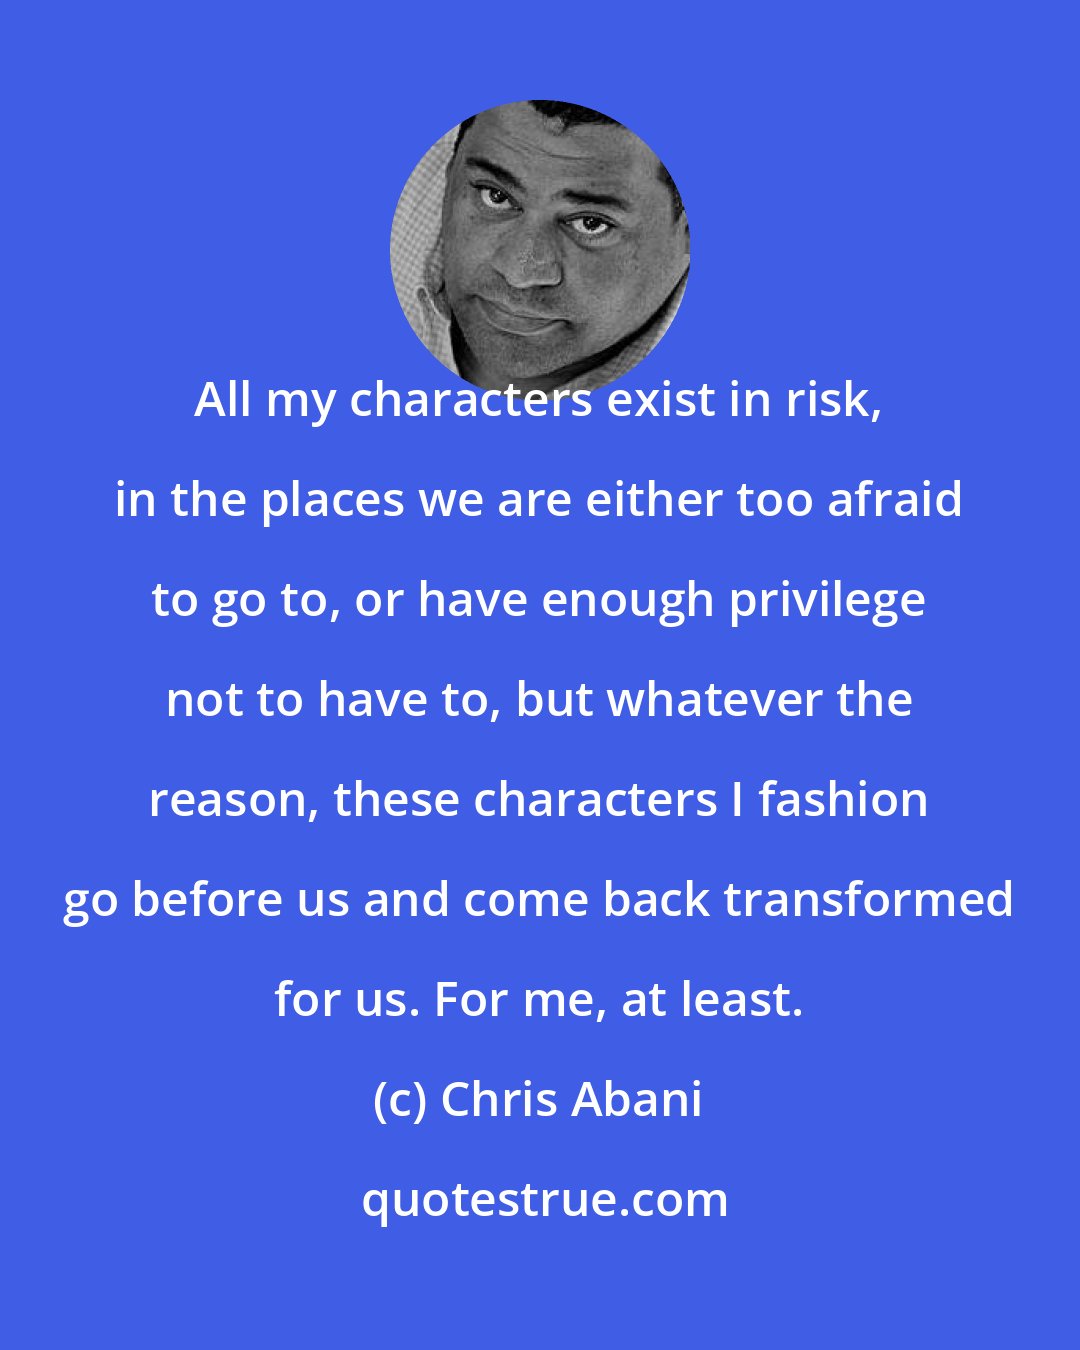 Chris Abani: All my characters exist in risk, in the places we are either too afraid to go to, or have enough privilege not to have to, but whatever the reason, these characters I fashion go before us and come back transformed for us. For me, at least.